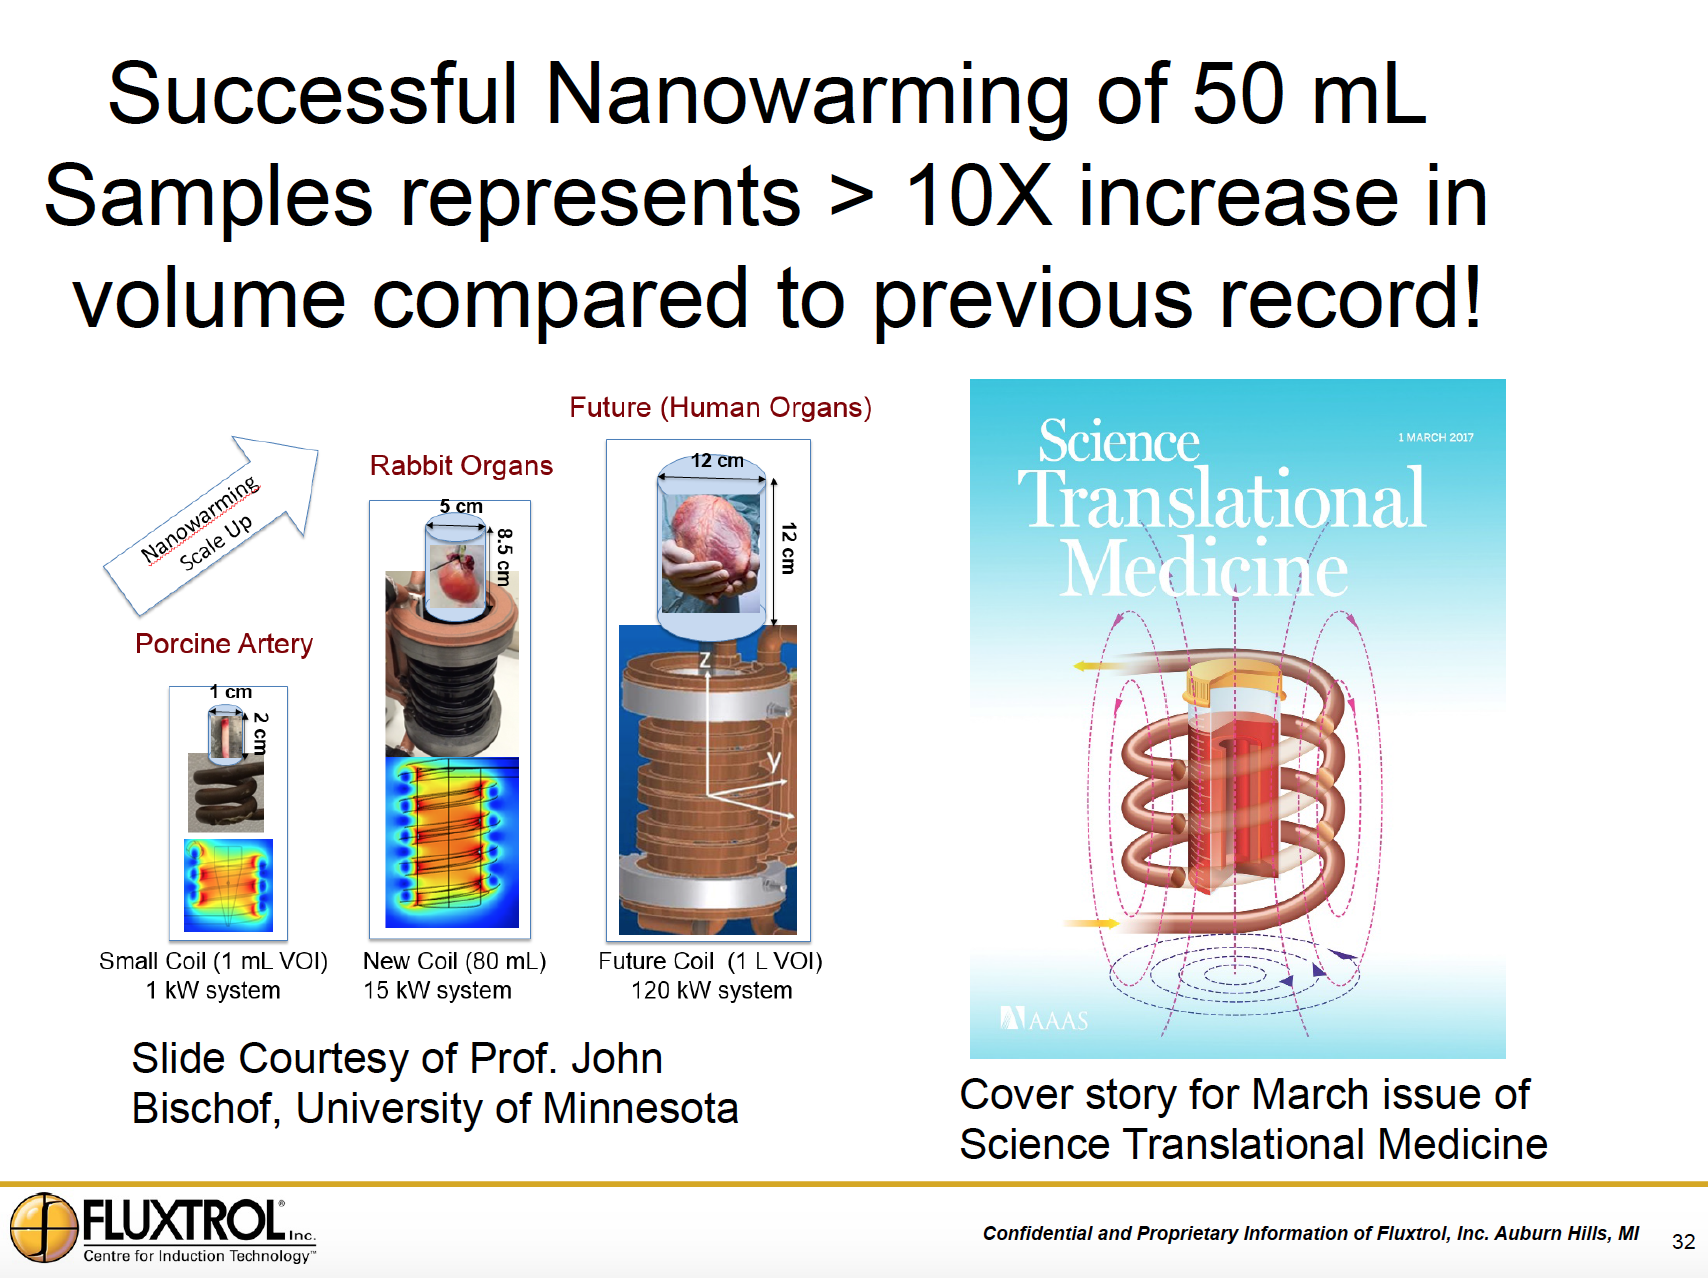 Fluxtrol | Applications of Induction Heating Enabling Advancement in Materials Science Figure 32 - Nanowarming Scale Up